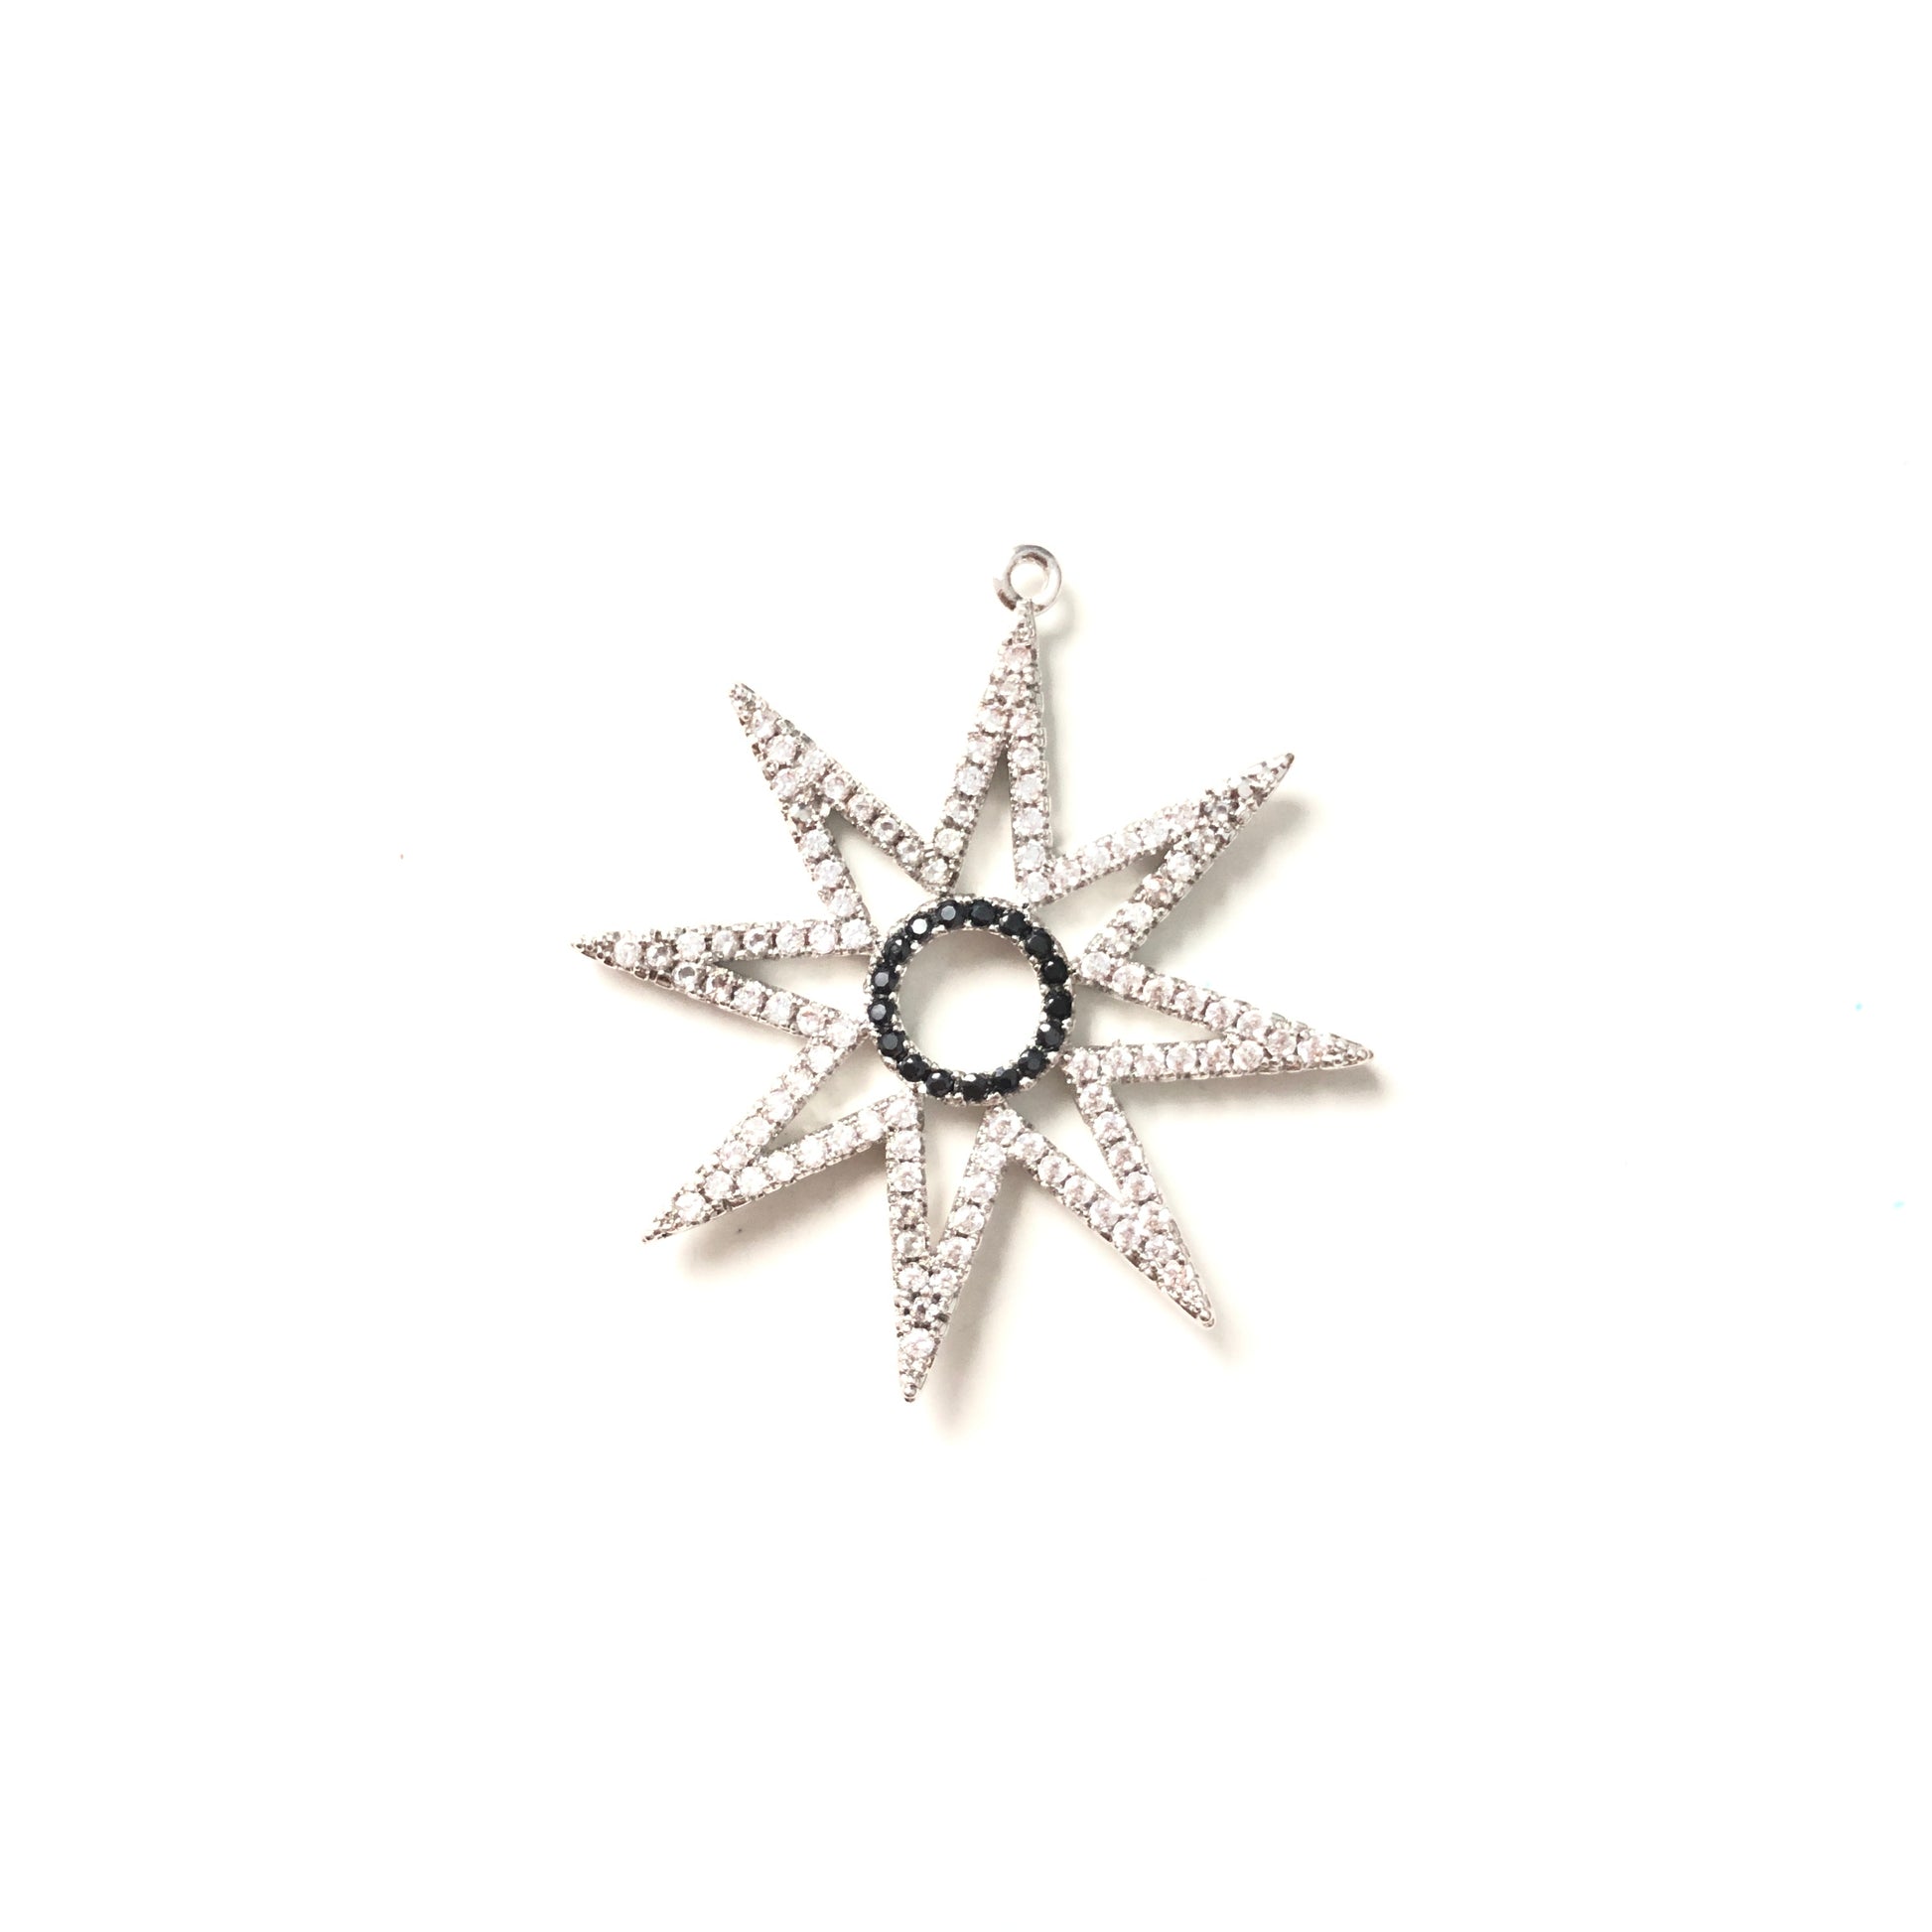 10pcs/lot 35*37mm CZ Paved Star Charms Silver CZ Paved Charms Large Sizes Sun Moon Stars Charms Beads Beyond